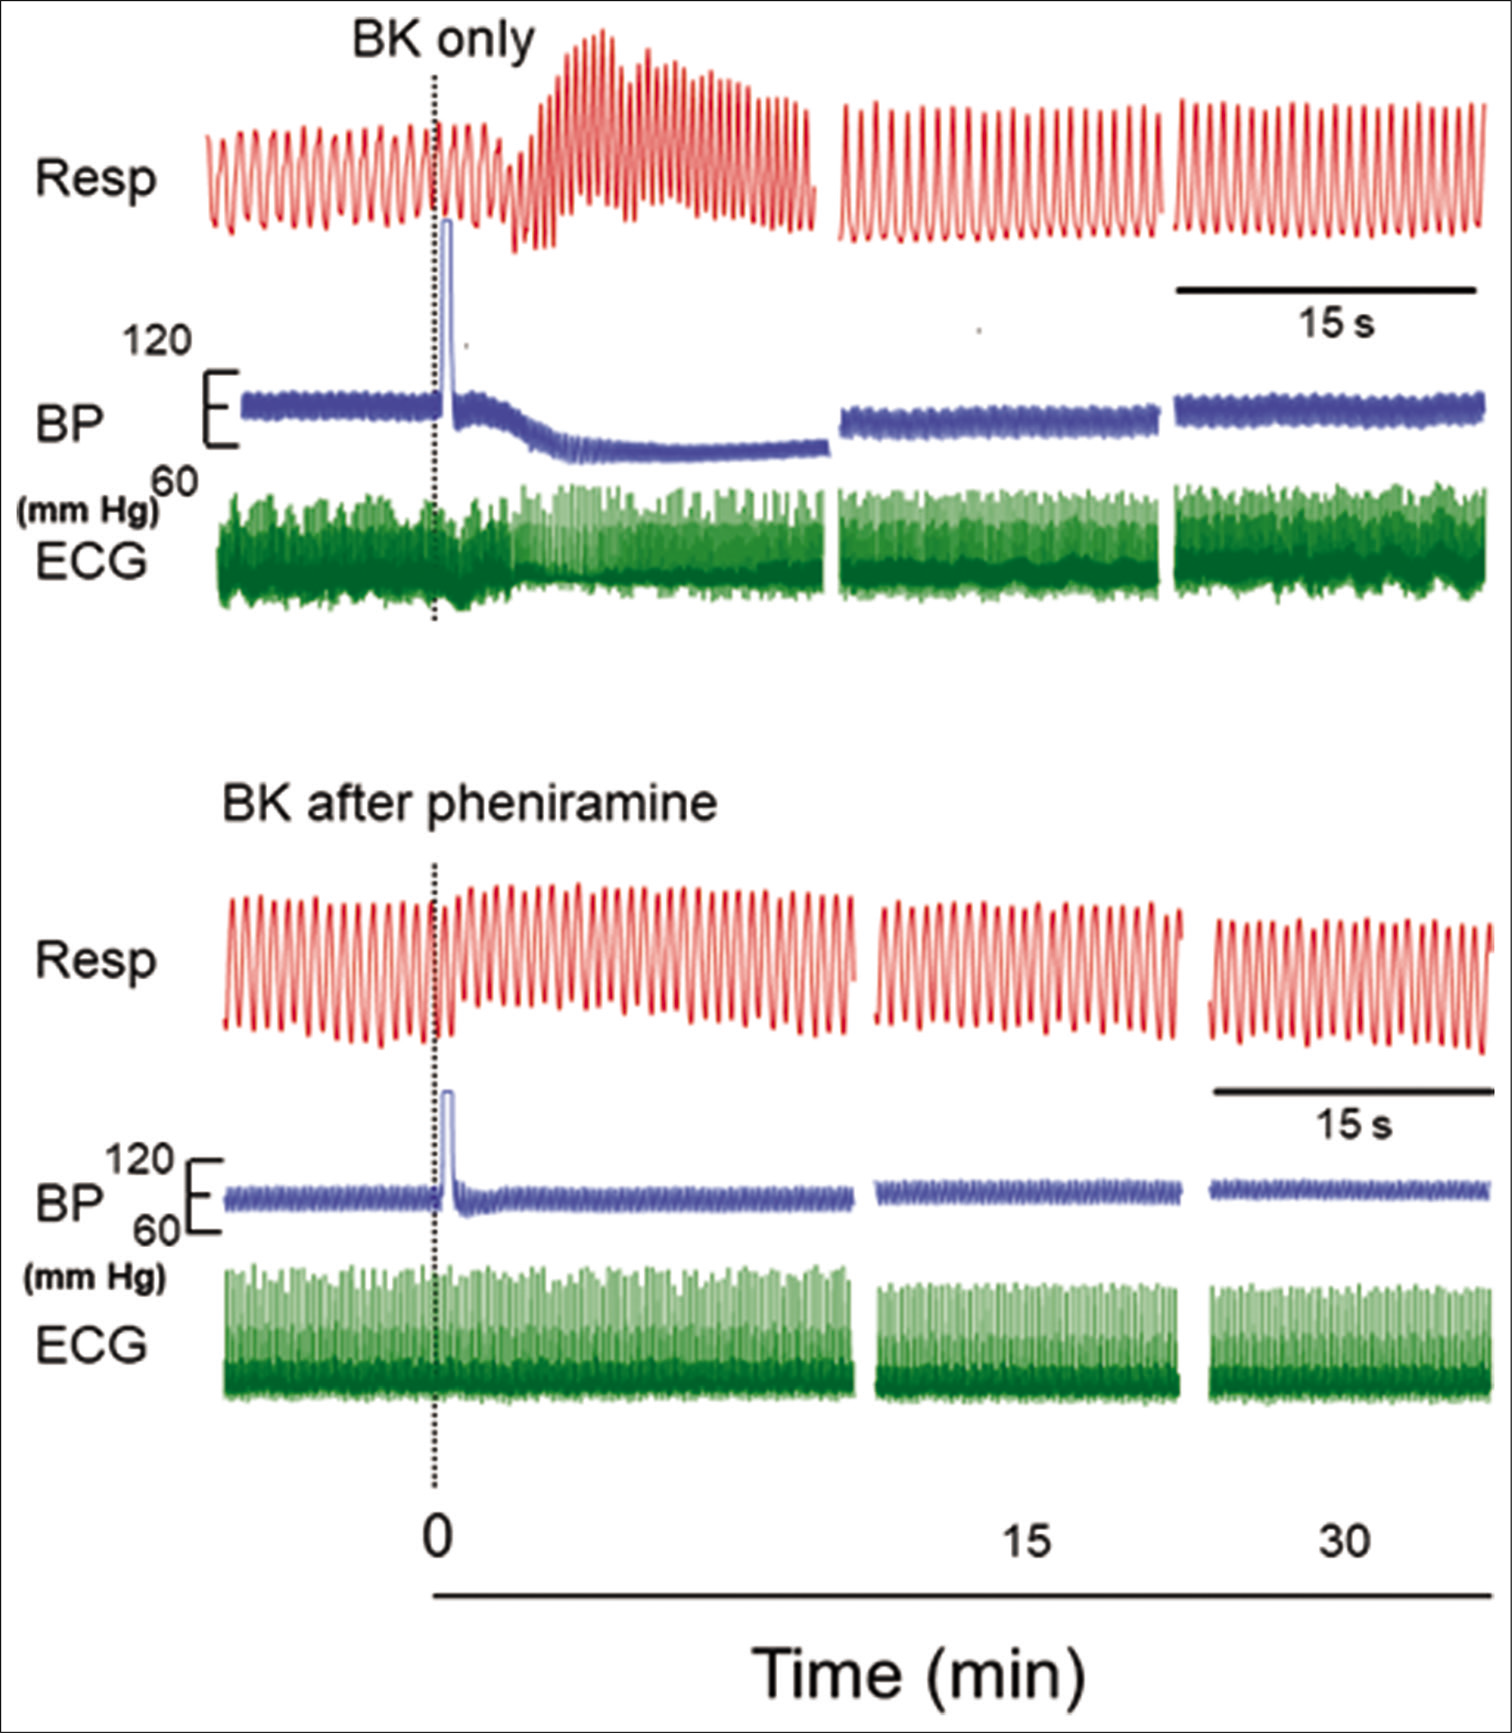 Original recordings showing the effect of injecting 1 µM concentration of bradykinin (BK) (0.10 ml) in a segment of femoral artery on respiration (Resp), blood pressure (BP), and electrocardiogram (ECG) in the naive and in pheniramine maleate pretreated rats. The responses after BK are shown at different time intervals as indicated in the lower panel. The point of injection is shown by dotted line. The horizontal line between Resp and BP indicates 15 s for all parameters.